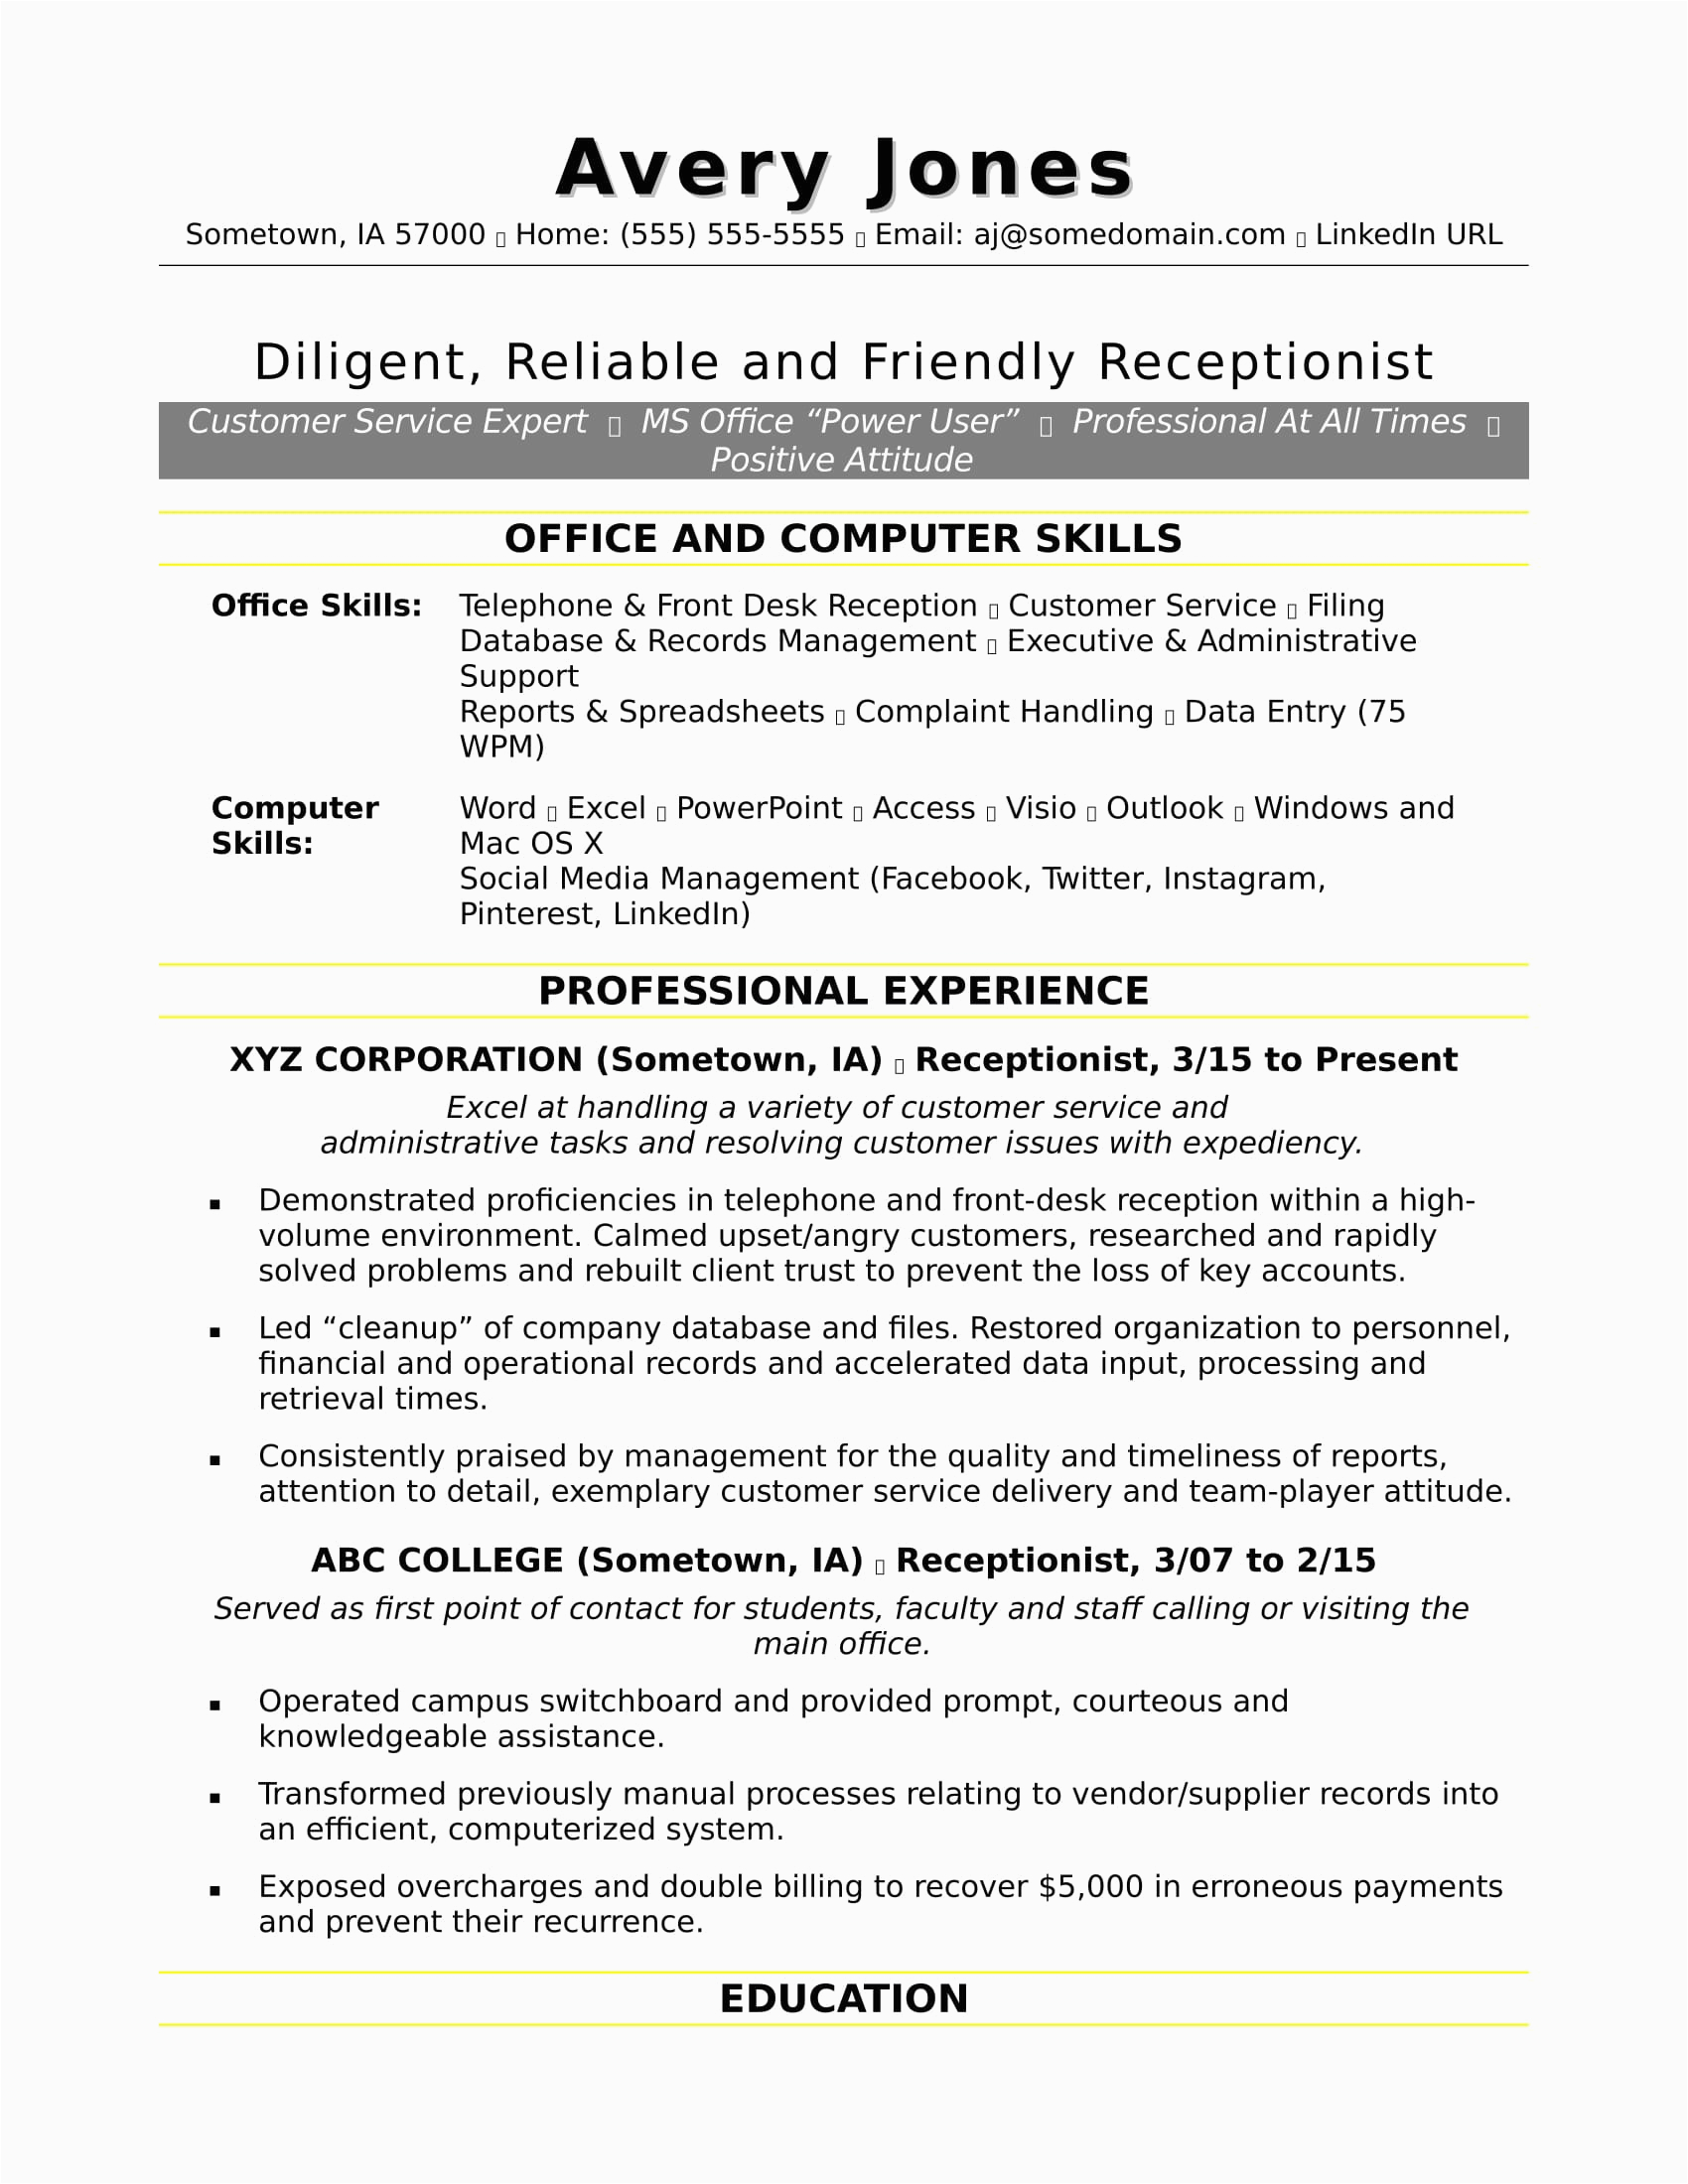 Sample Resume for Front Office Receptionist Receptionist Resume Sample